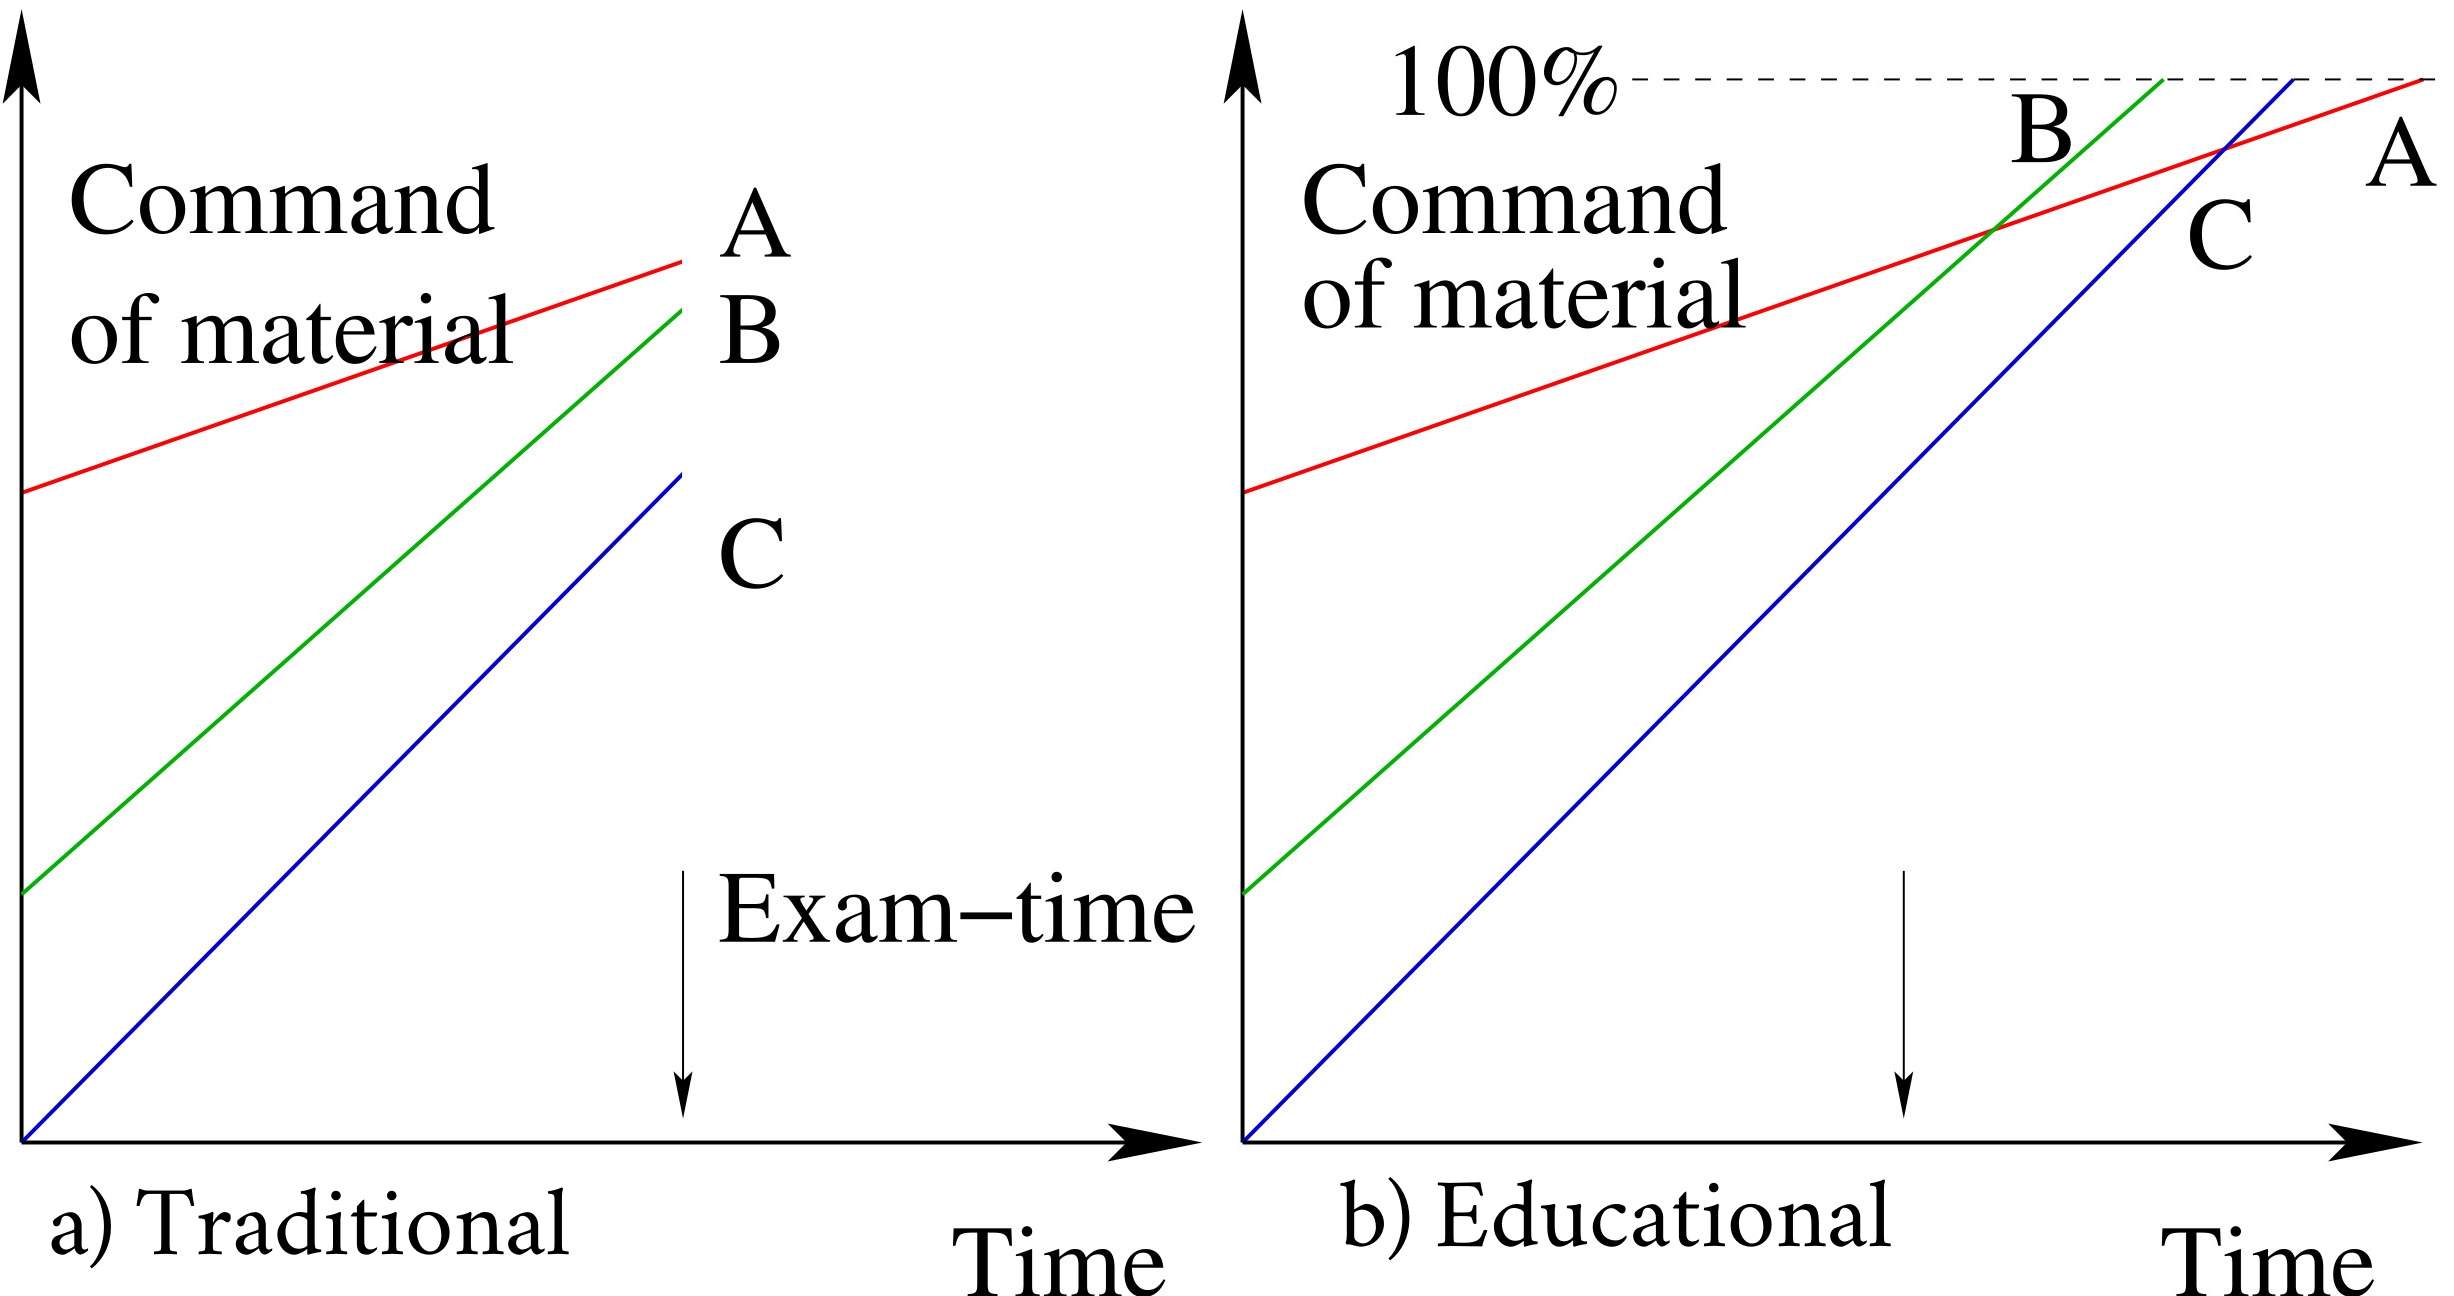 Figure 2: Everyone can get an A, regardless of learning rate, if their education is not halted by exams. Traditional system on the left, with an educational system on the right.